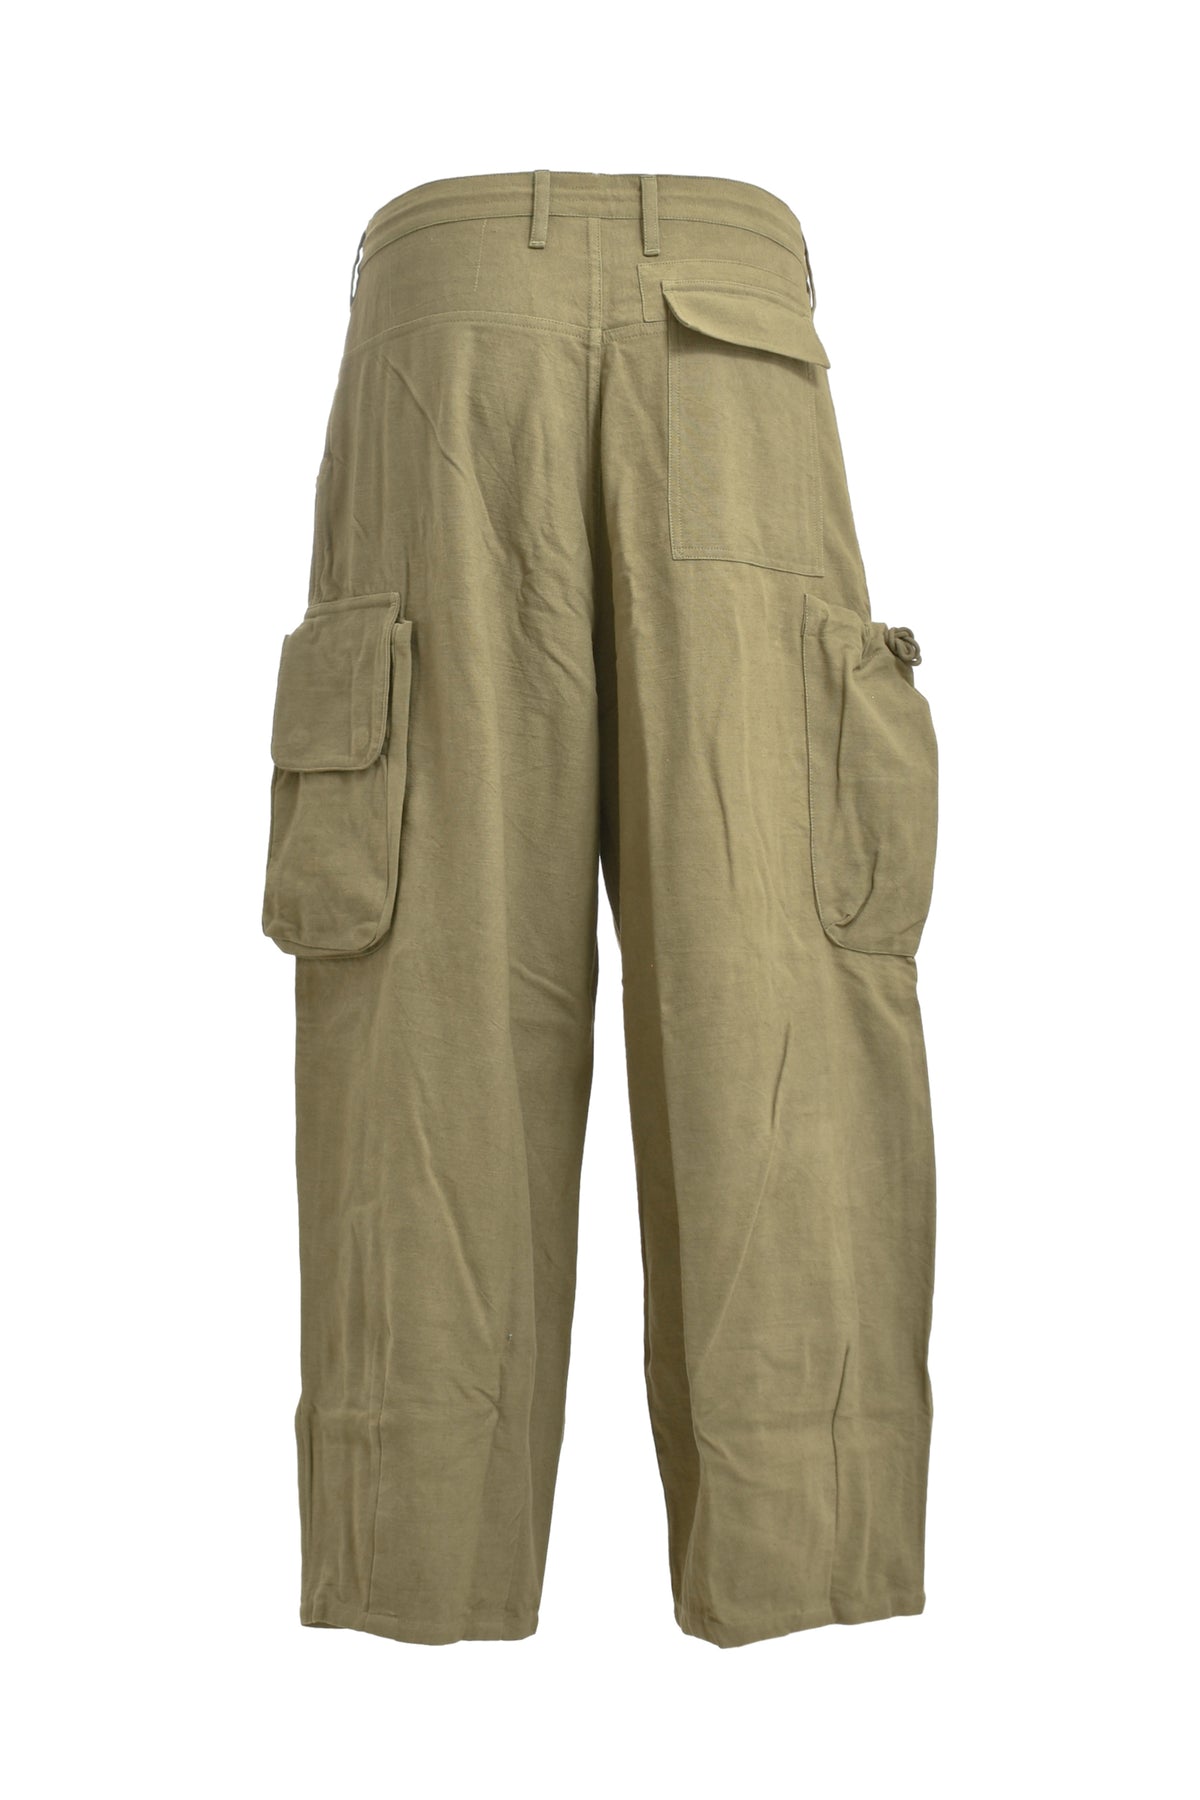 STORY mfg. FORAGER PANTS / OLV